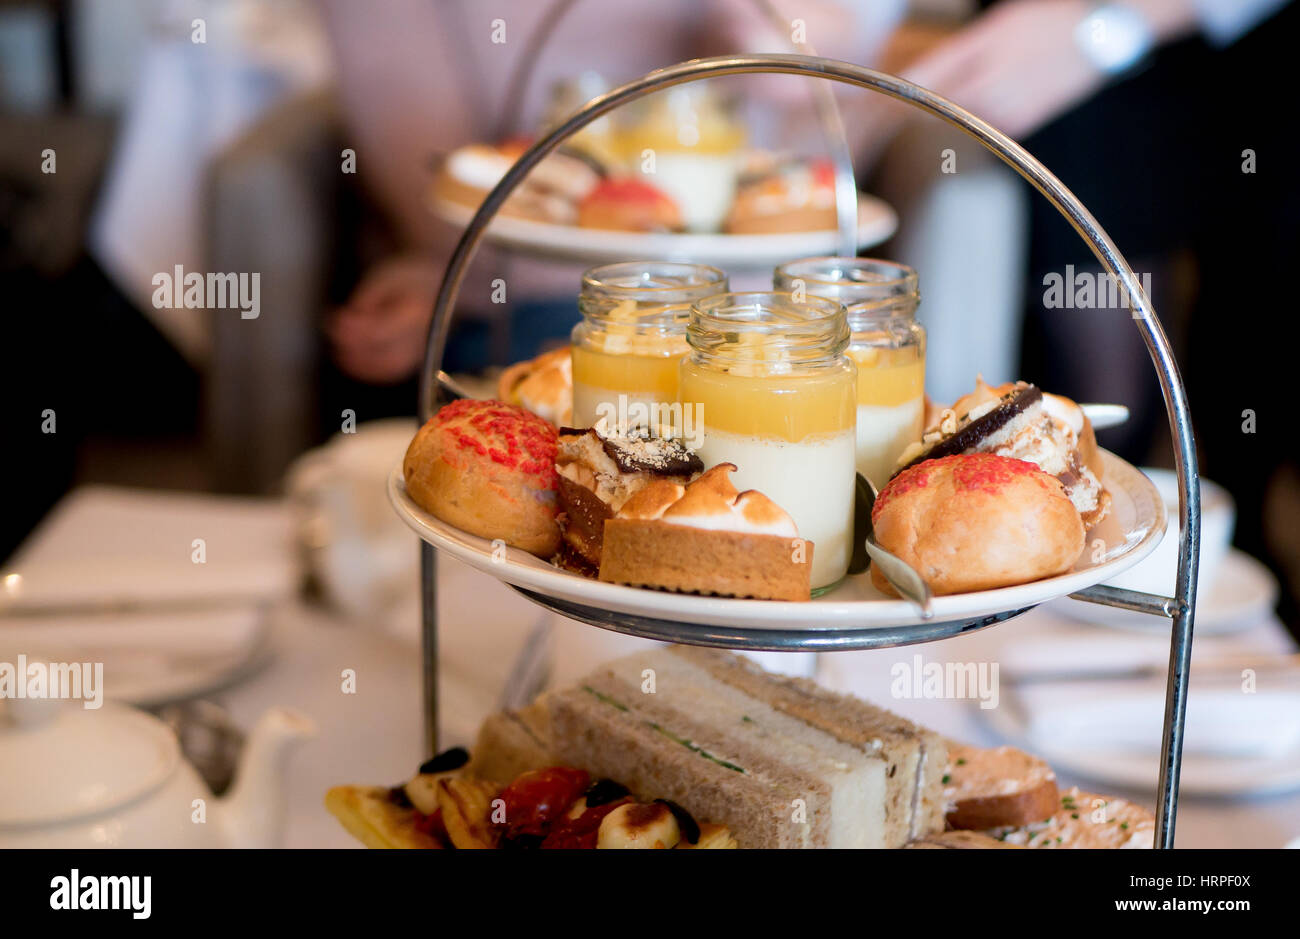 Cream tree in Sussex, UK. Here are pastries and condiments. Stock Photo